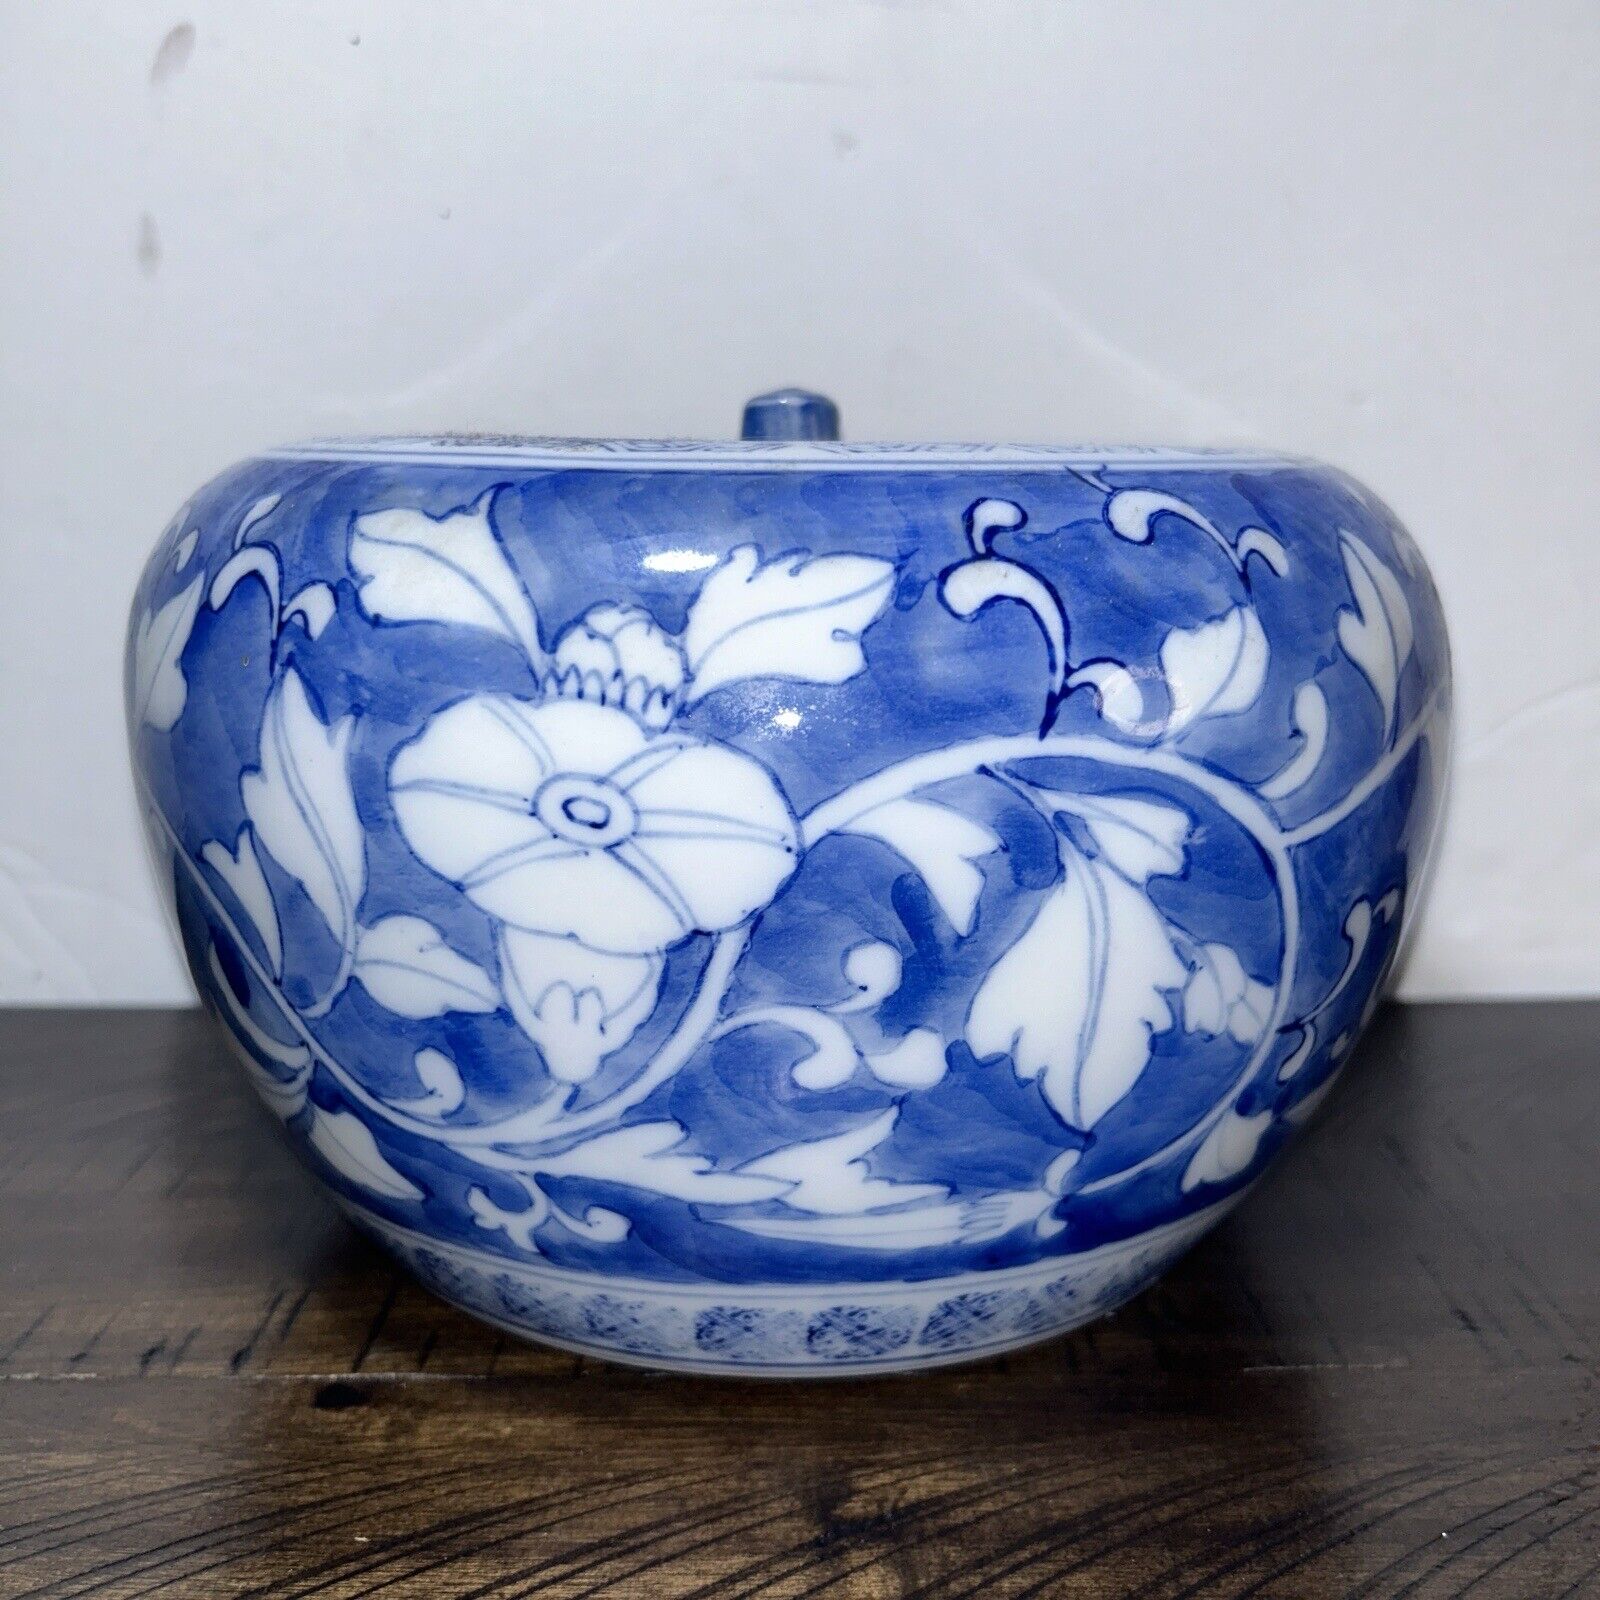 Vintage Chinese Porcelain Jar From The Qing Dynasty ~ Blue & White